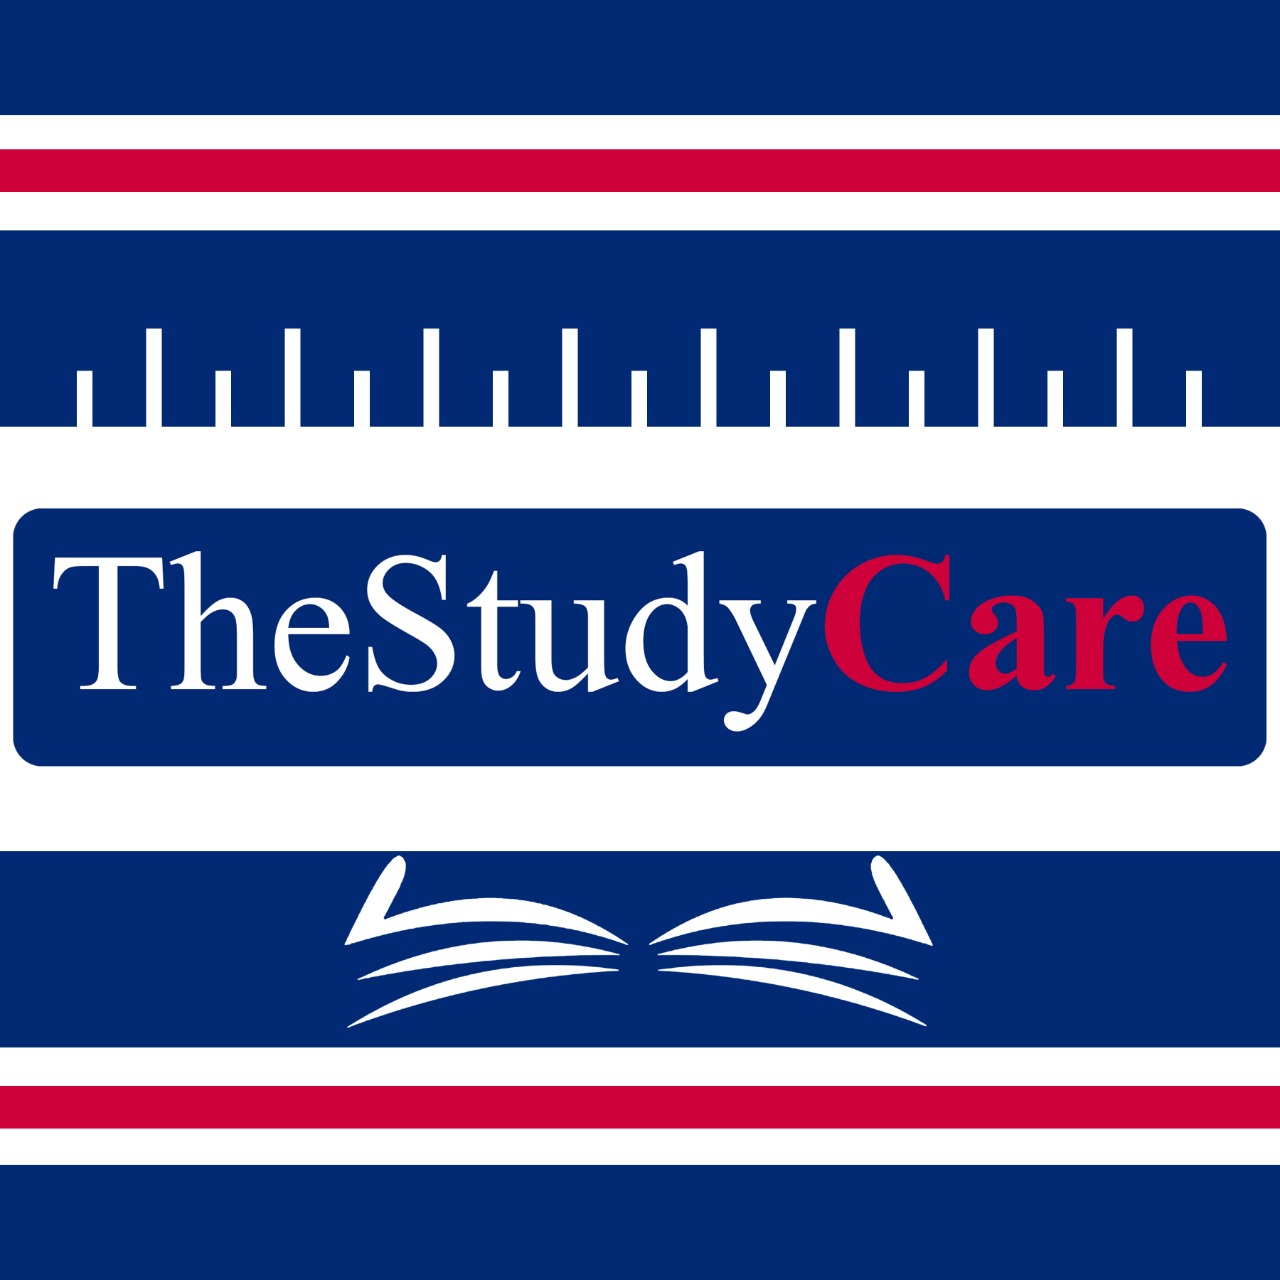 Introducing our partner Company - TheStudyCare 